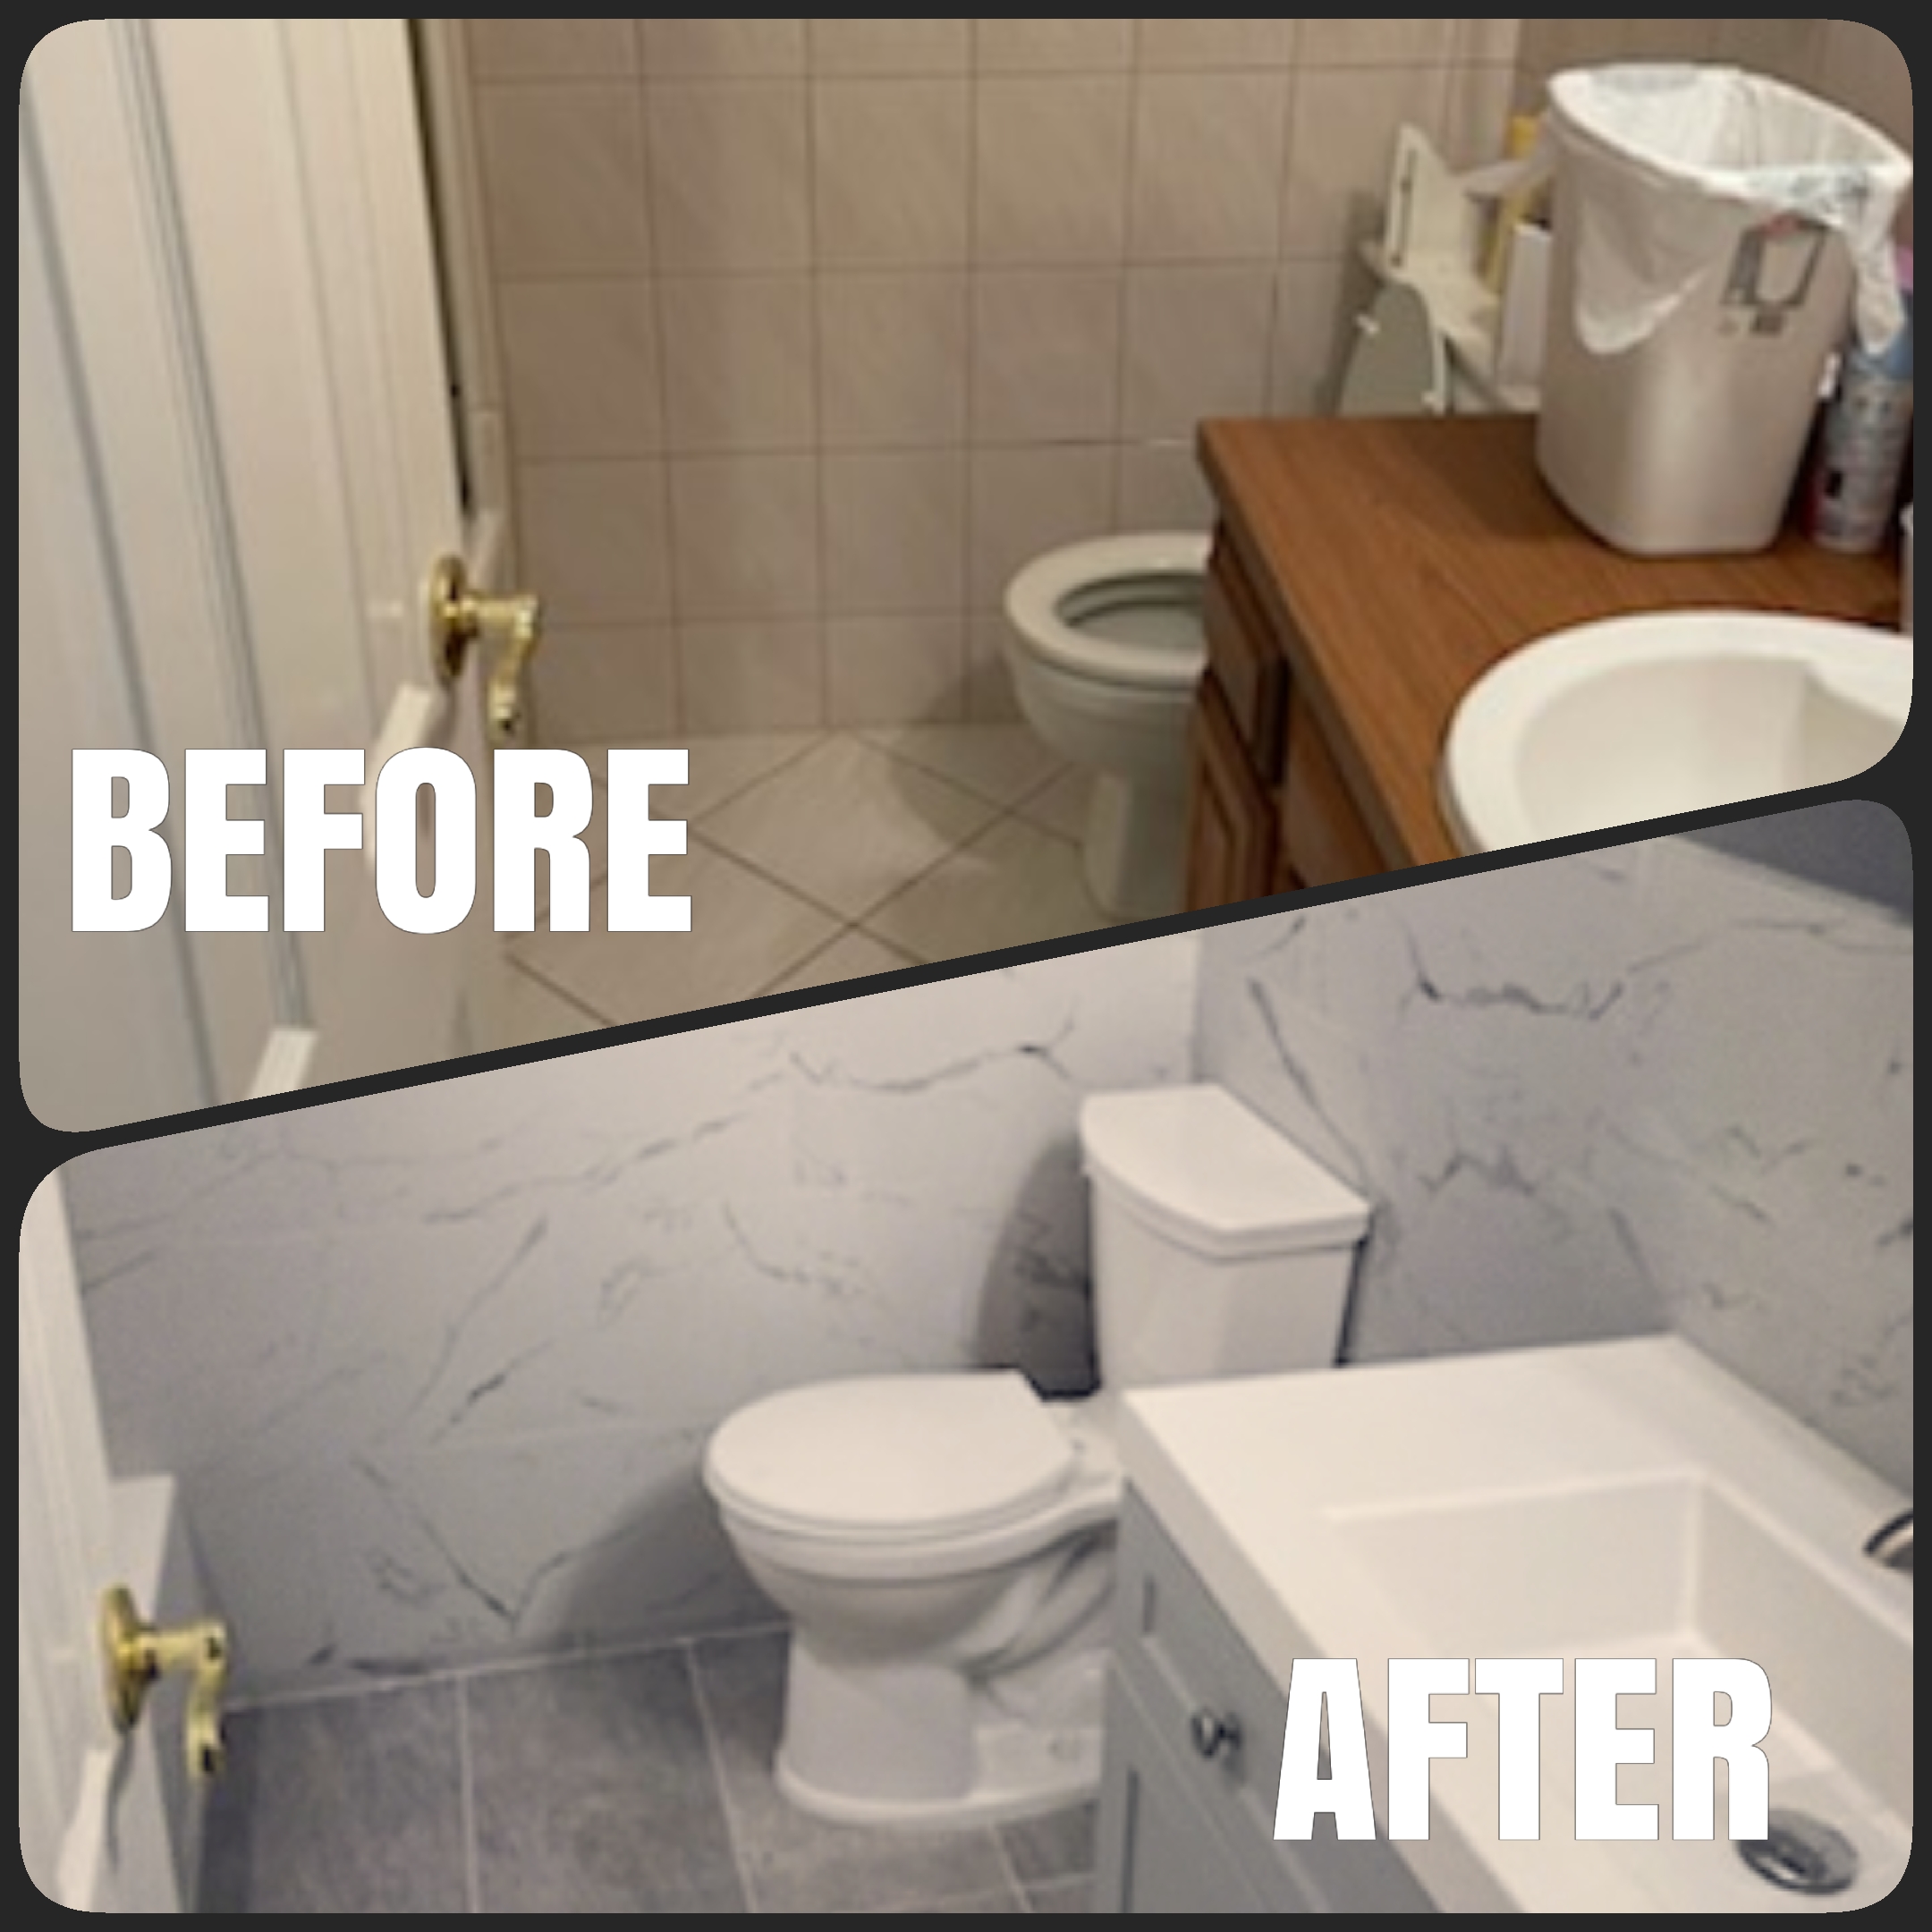 A before and after of our bathroom remodel. Before our services the bathroom was plain with tile flooring and wall. A wooden countertop next to the toilet with a trashcan on top of it. Afterwards, the flooring was replaced with graphite and matching it the wall has an almost marble texture. the counter top was replaced to remain in line with the beautiful neutral color scheme.